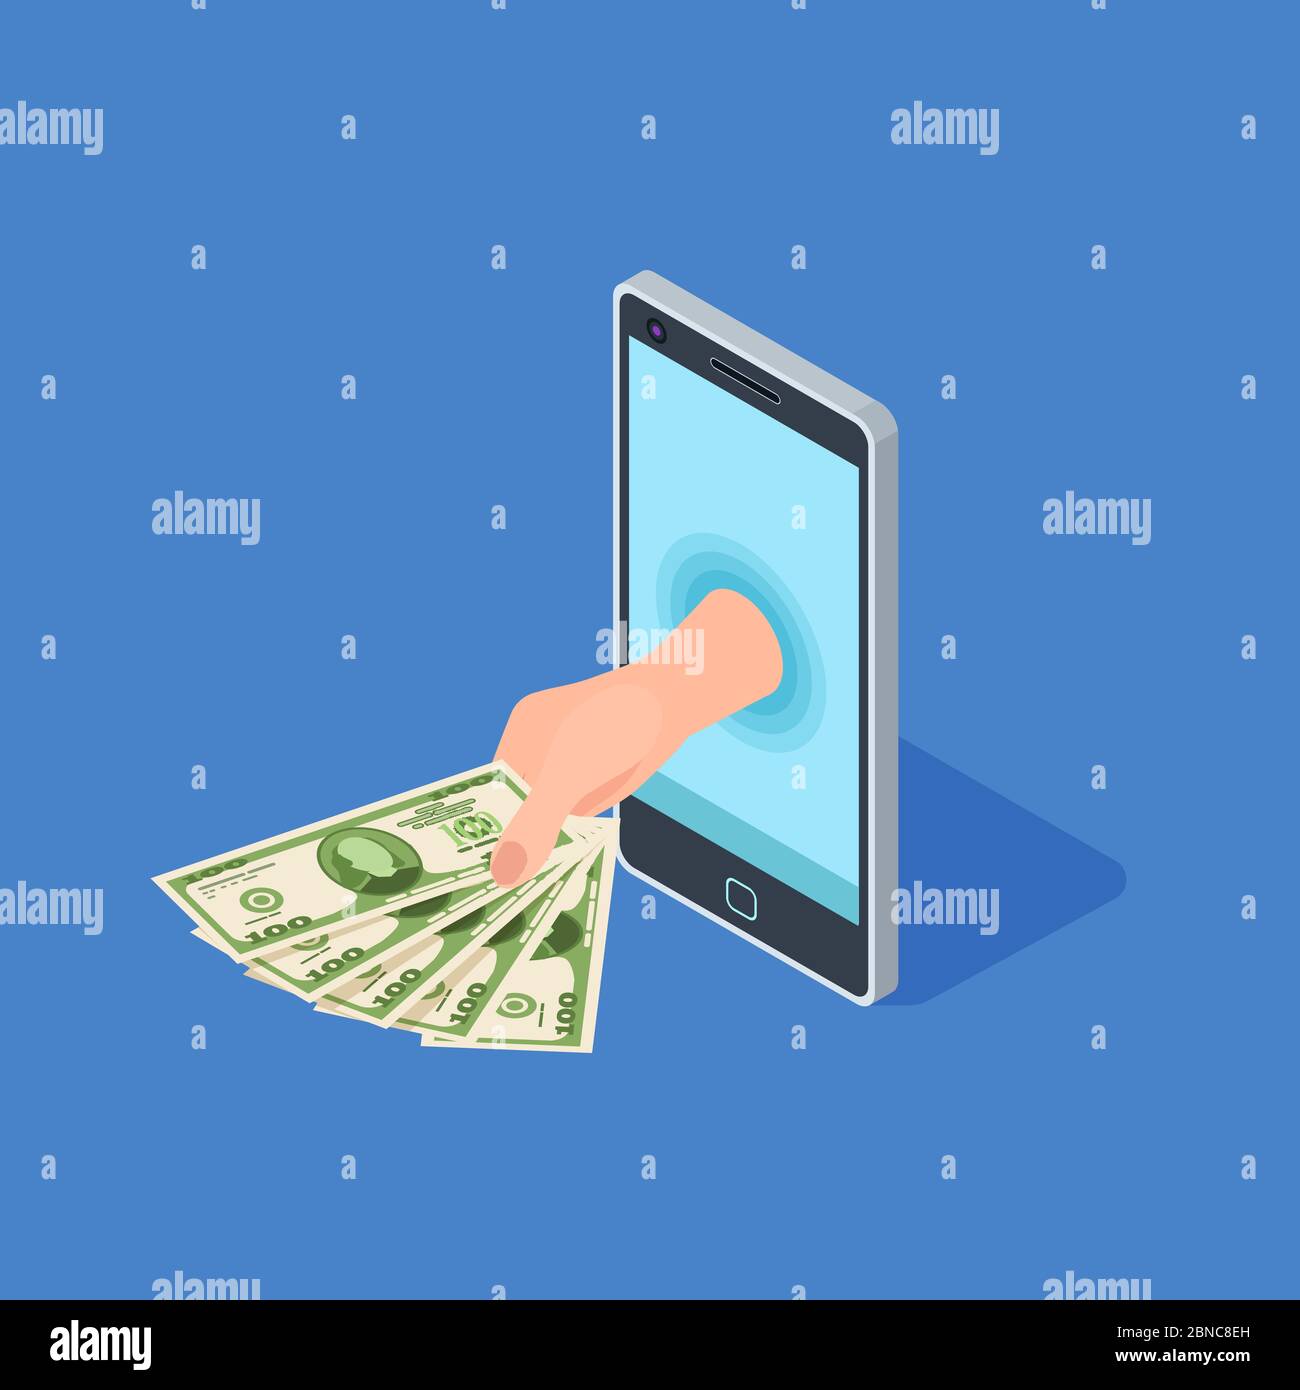 Smartphone online banking vector concept. Hand hold money - isometric banking design. Illustration of mobile banking, hand with banknote cash Stock Vector